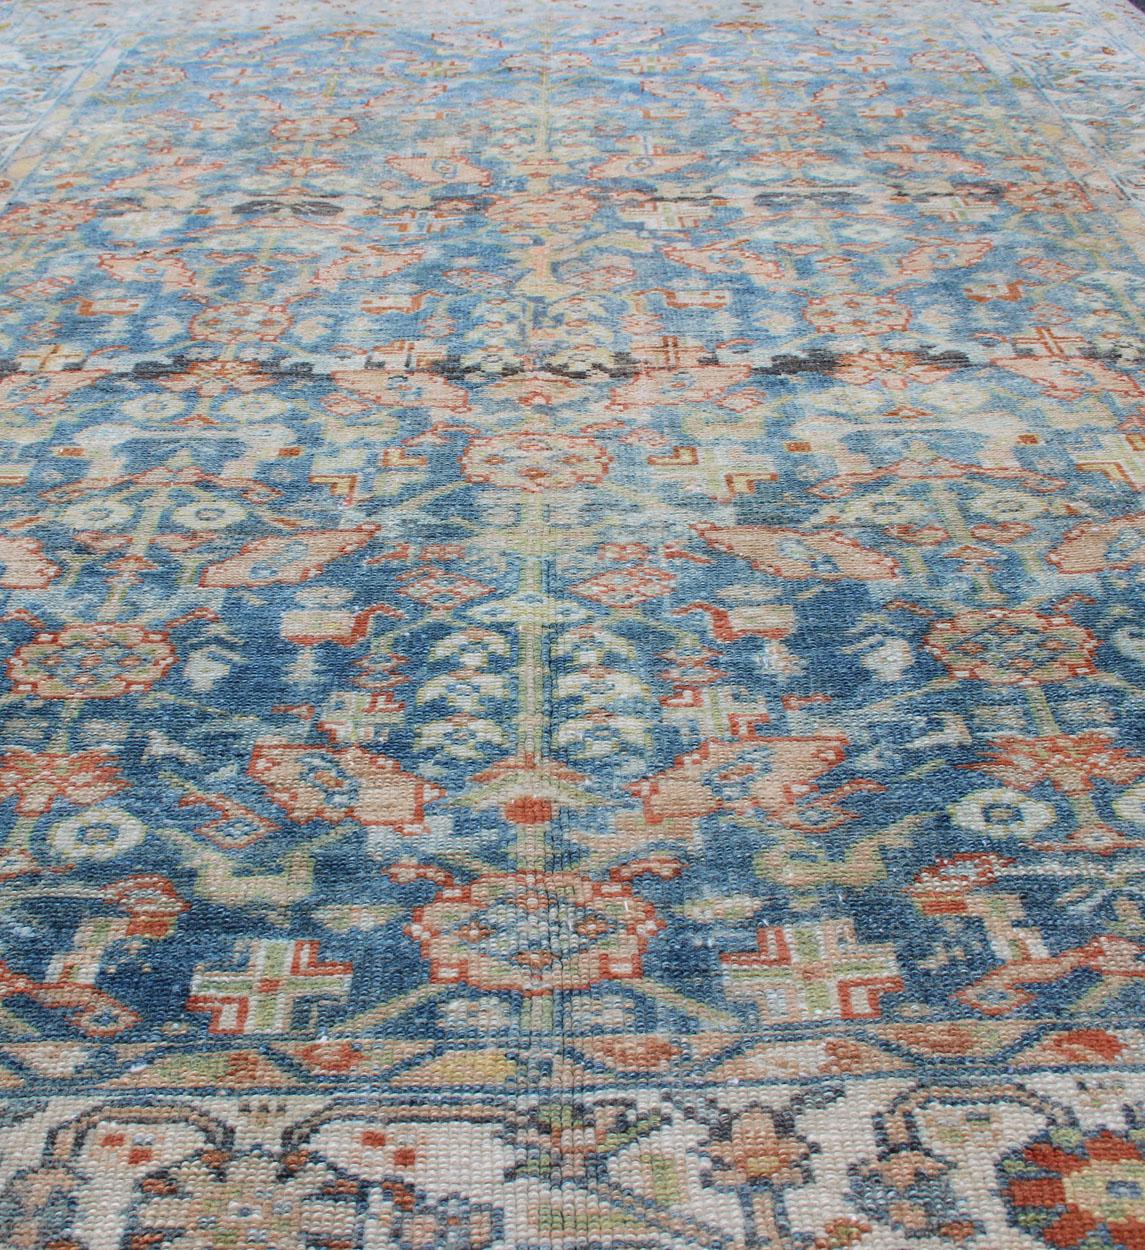 Wool Persian Antique Malayer Rug with All-Over Design in Various Blue, Ivory & Red